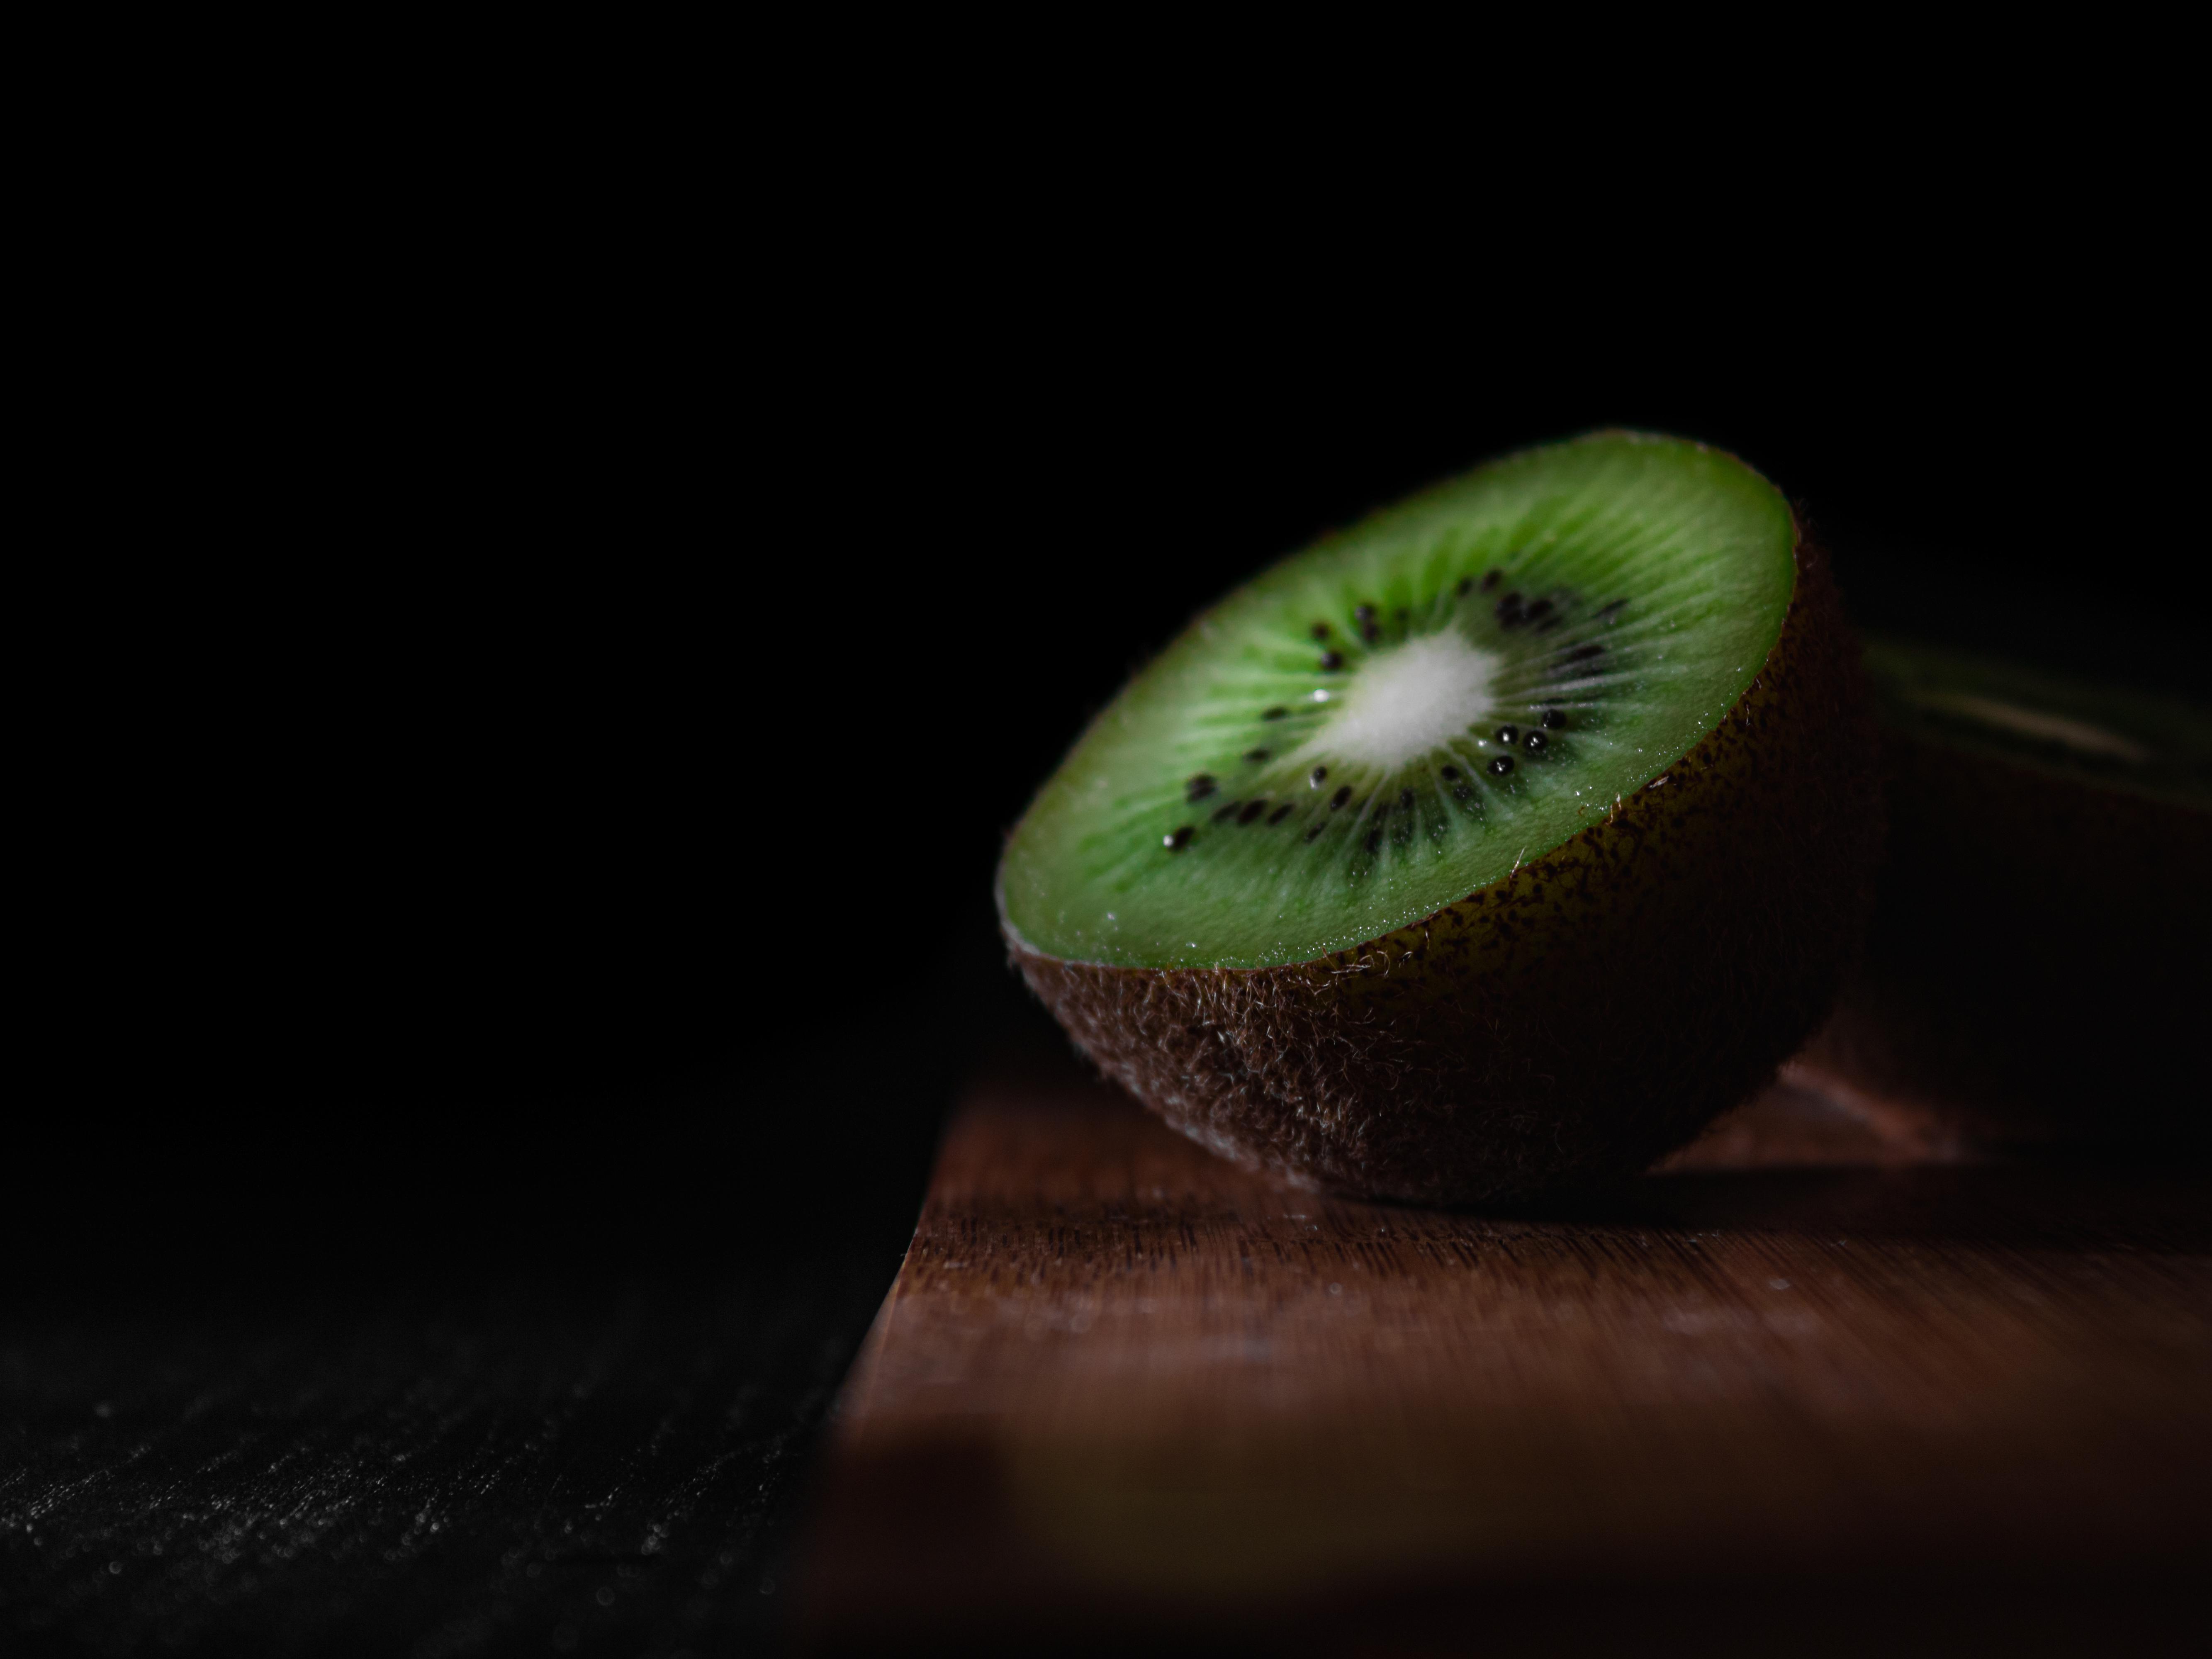 Kiwi 4K wallpaper for your desktop or mobile screen free and easy to download